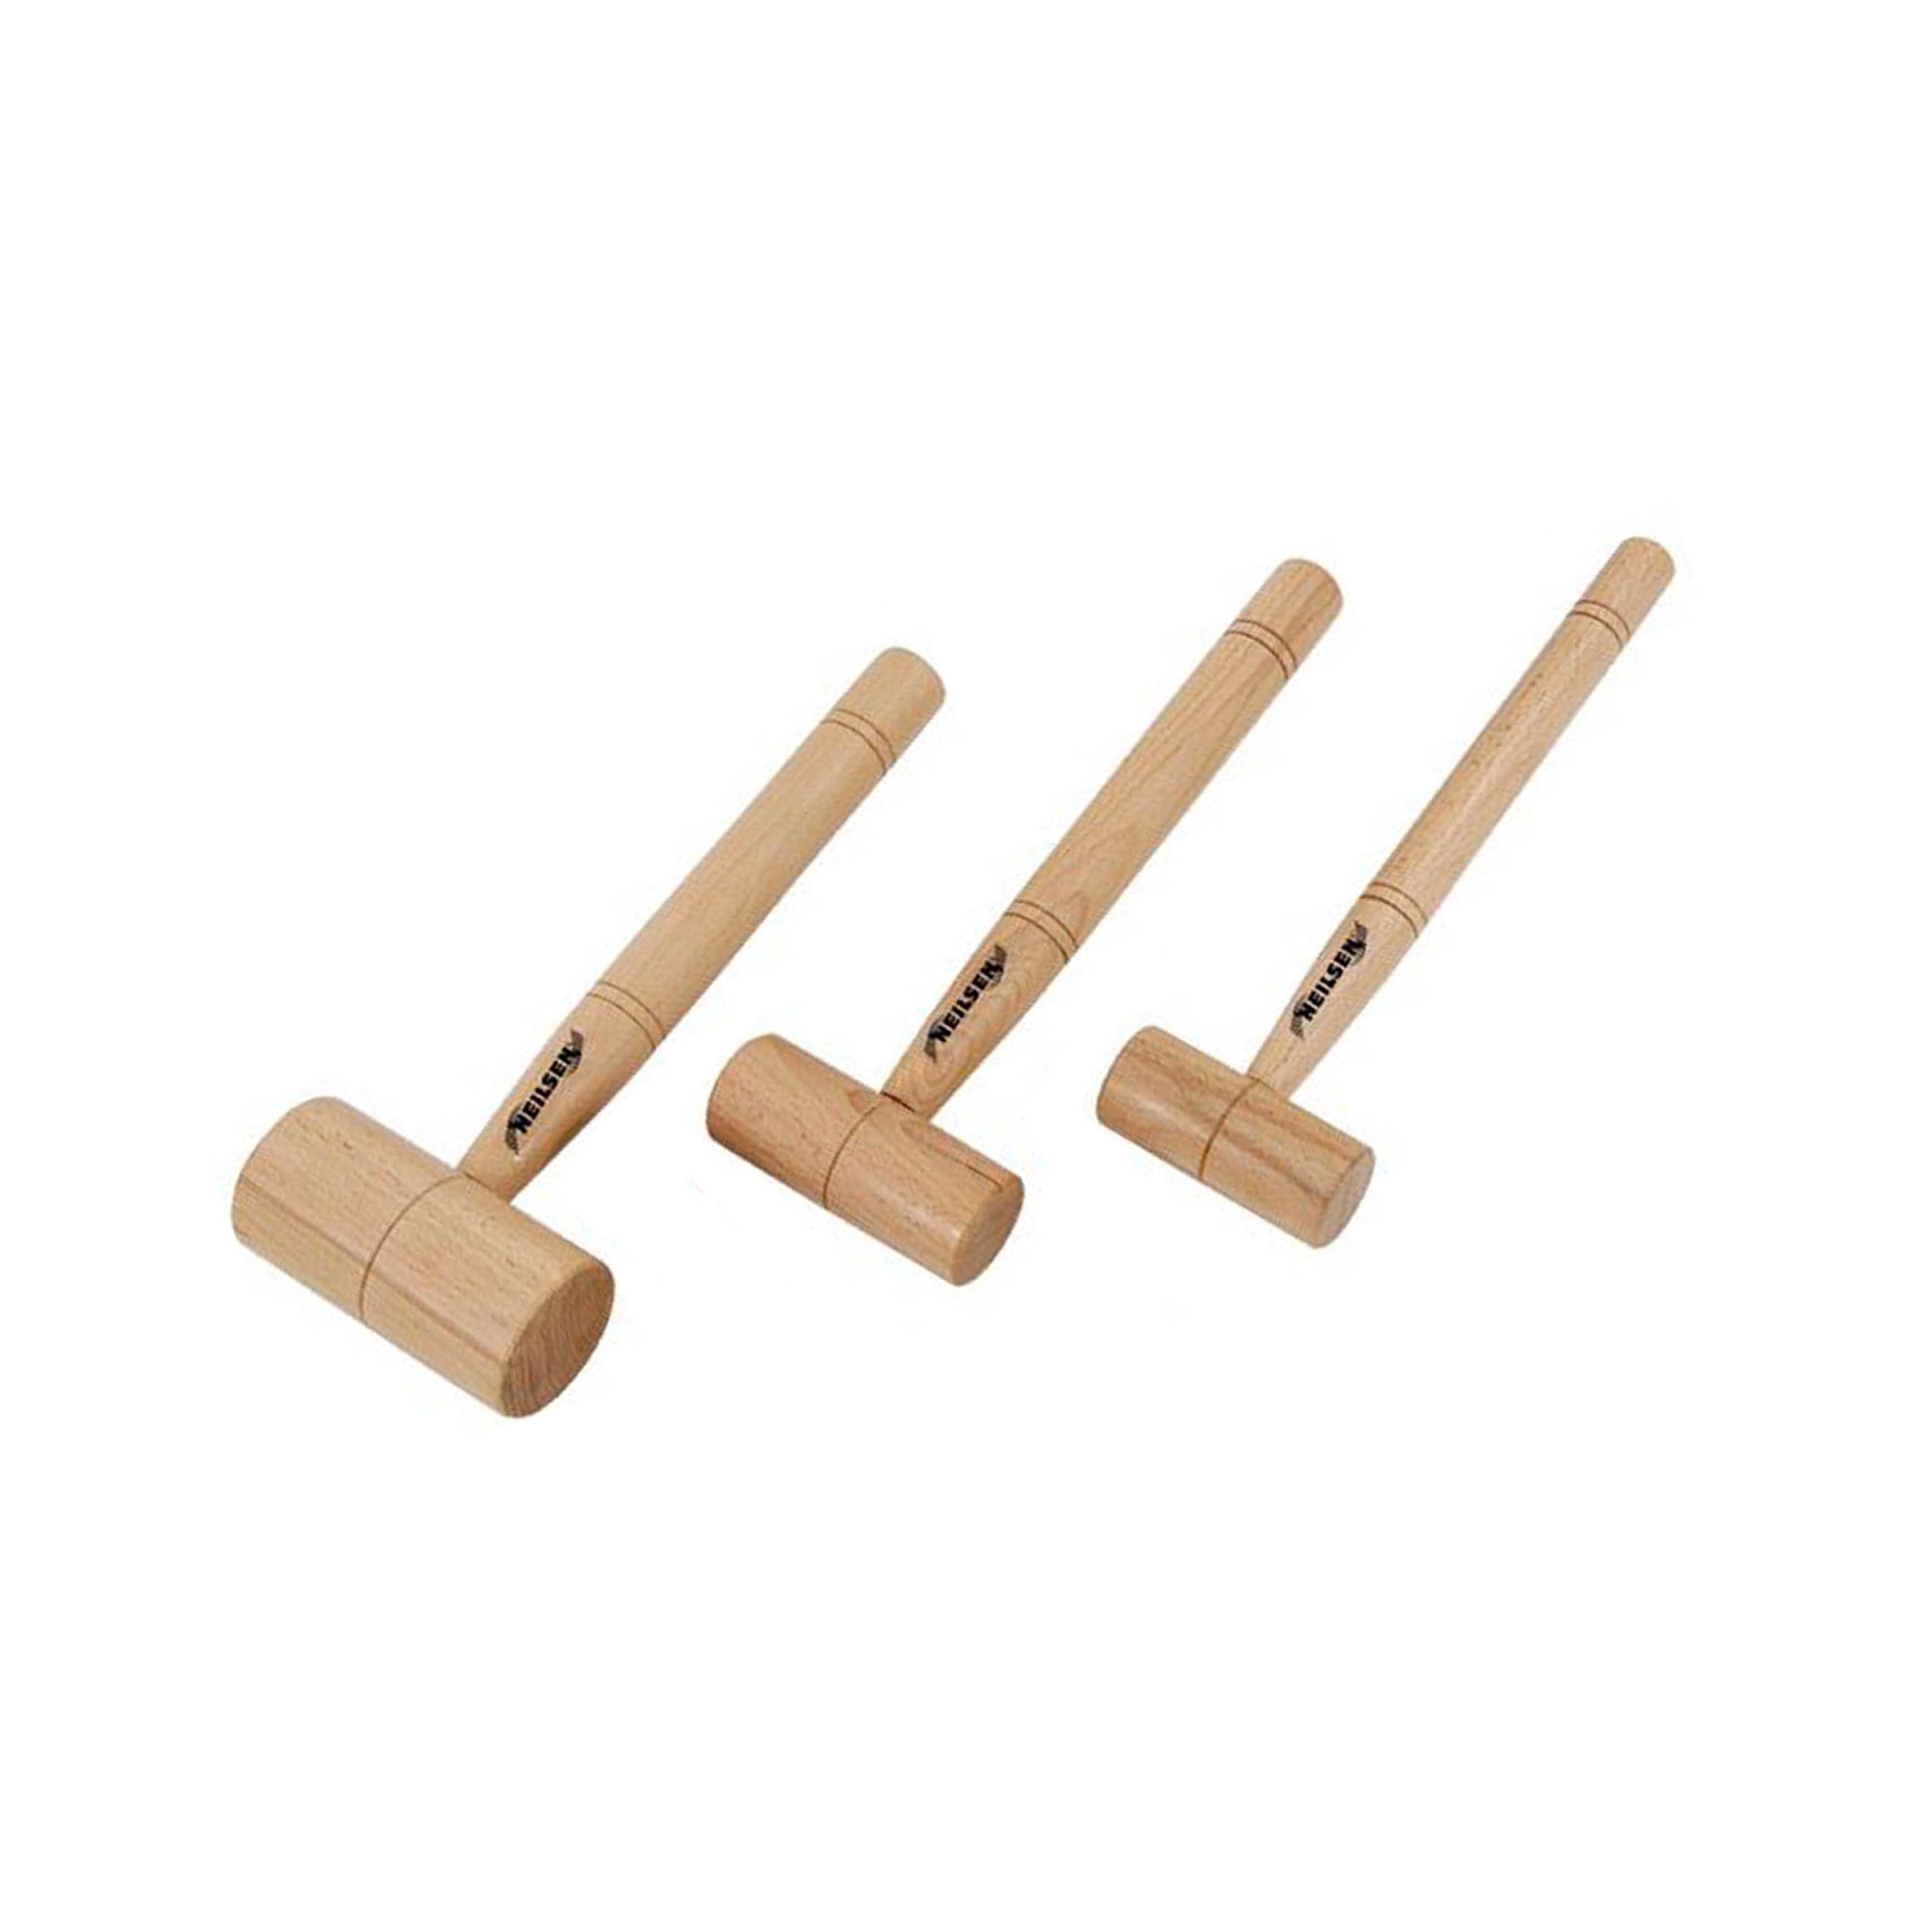 Weighted Rawhide Mallet by Garland 1-1/2 Face / 12oz Head 37.712 